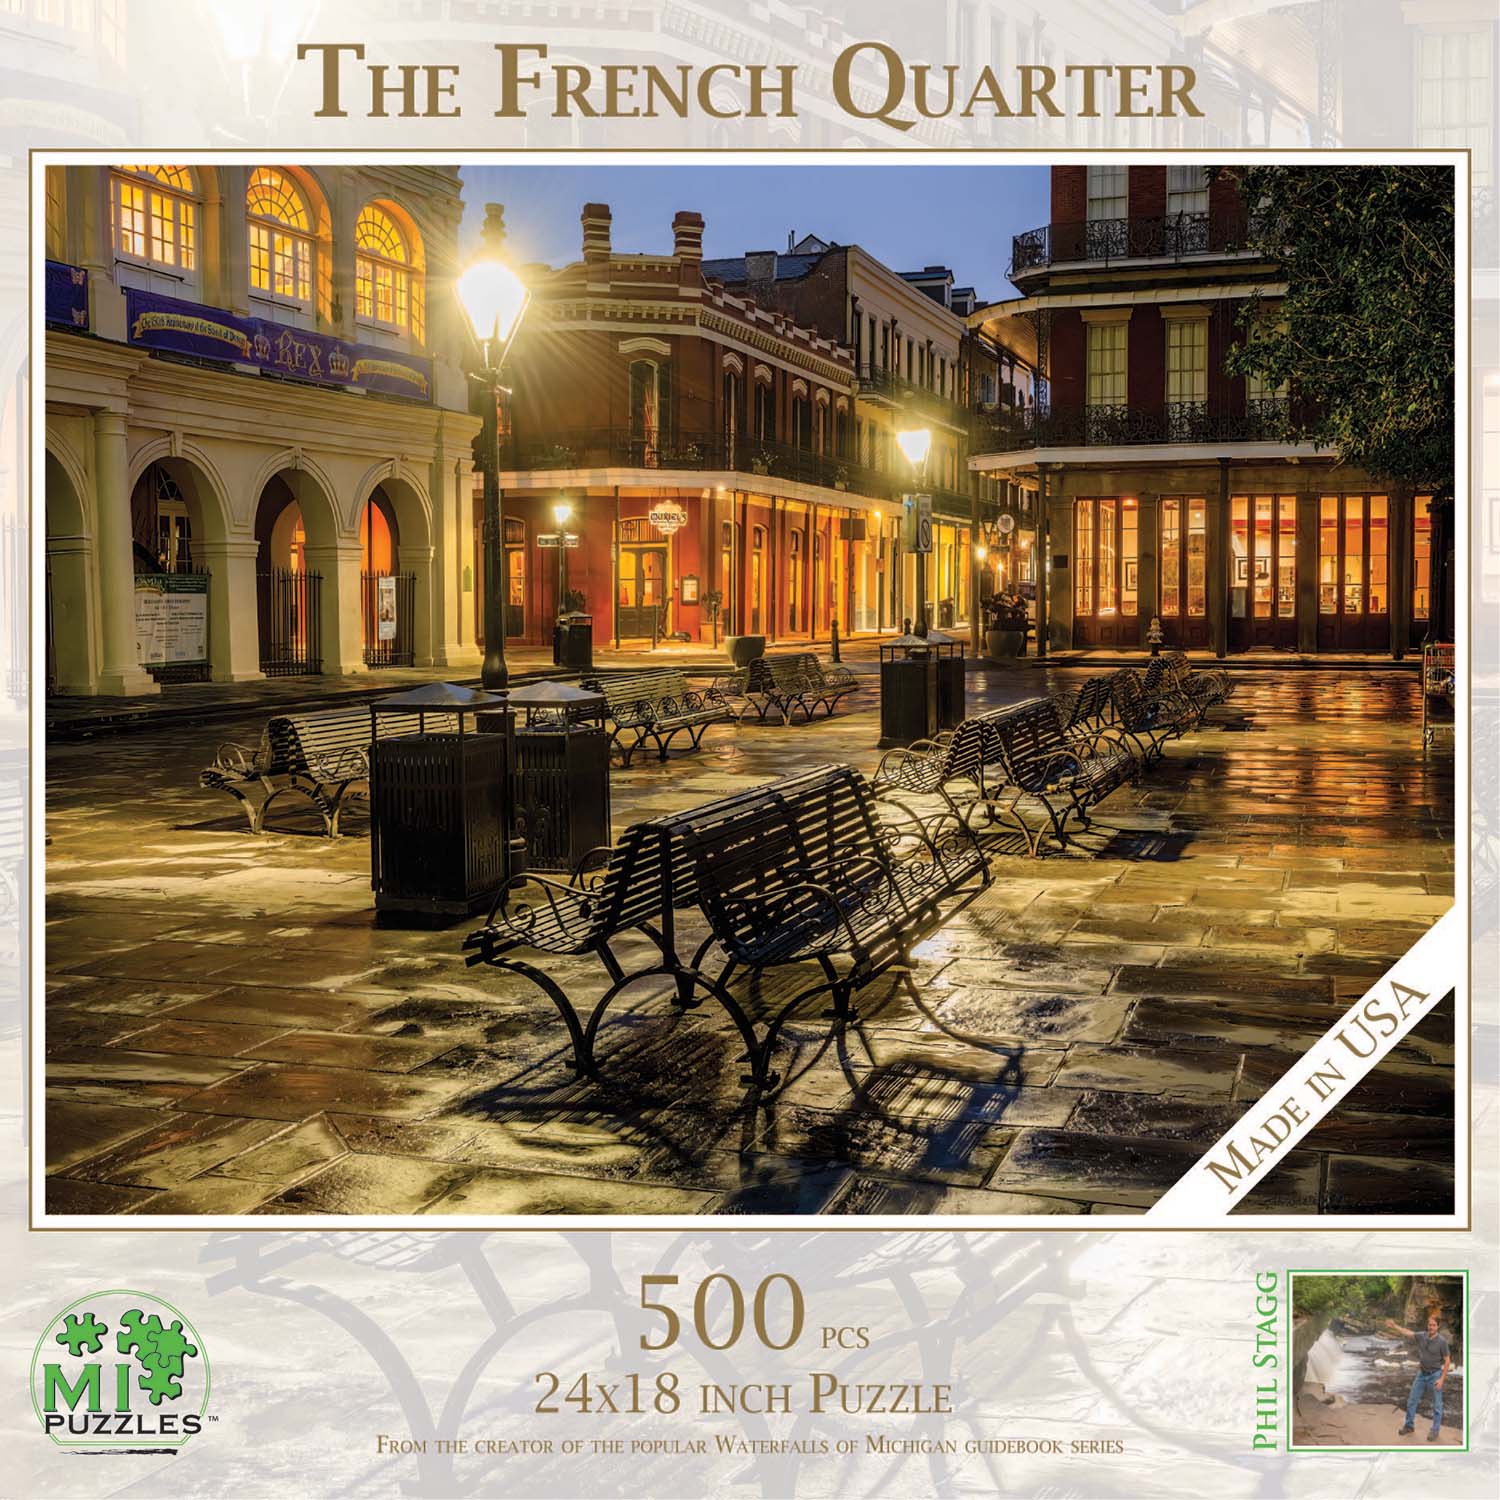 The French Quarter Photography Jigsaw Puzzle